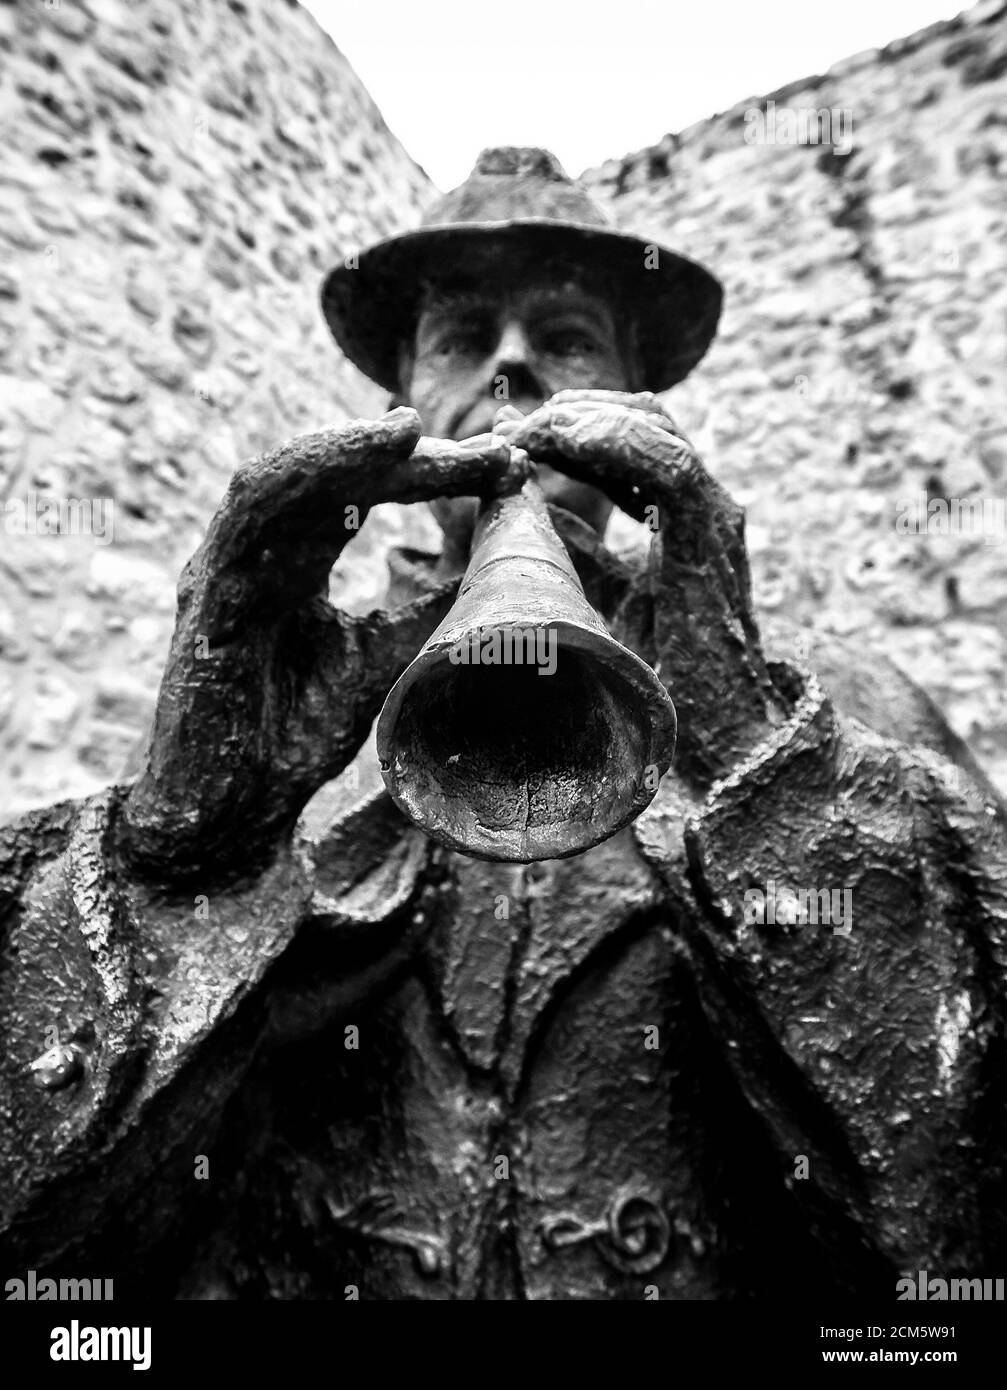 Bronze statue of a traditional folk musician playing a typical wind instrument called 'Dulzaina' in front of a stoned wall in Burgos, Spain. Stock Photo